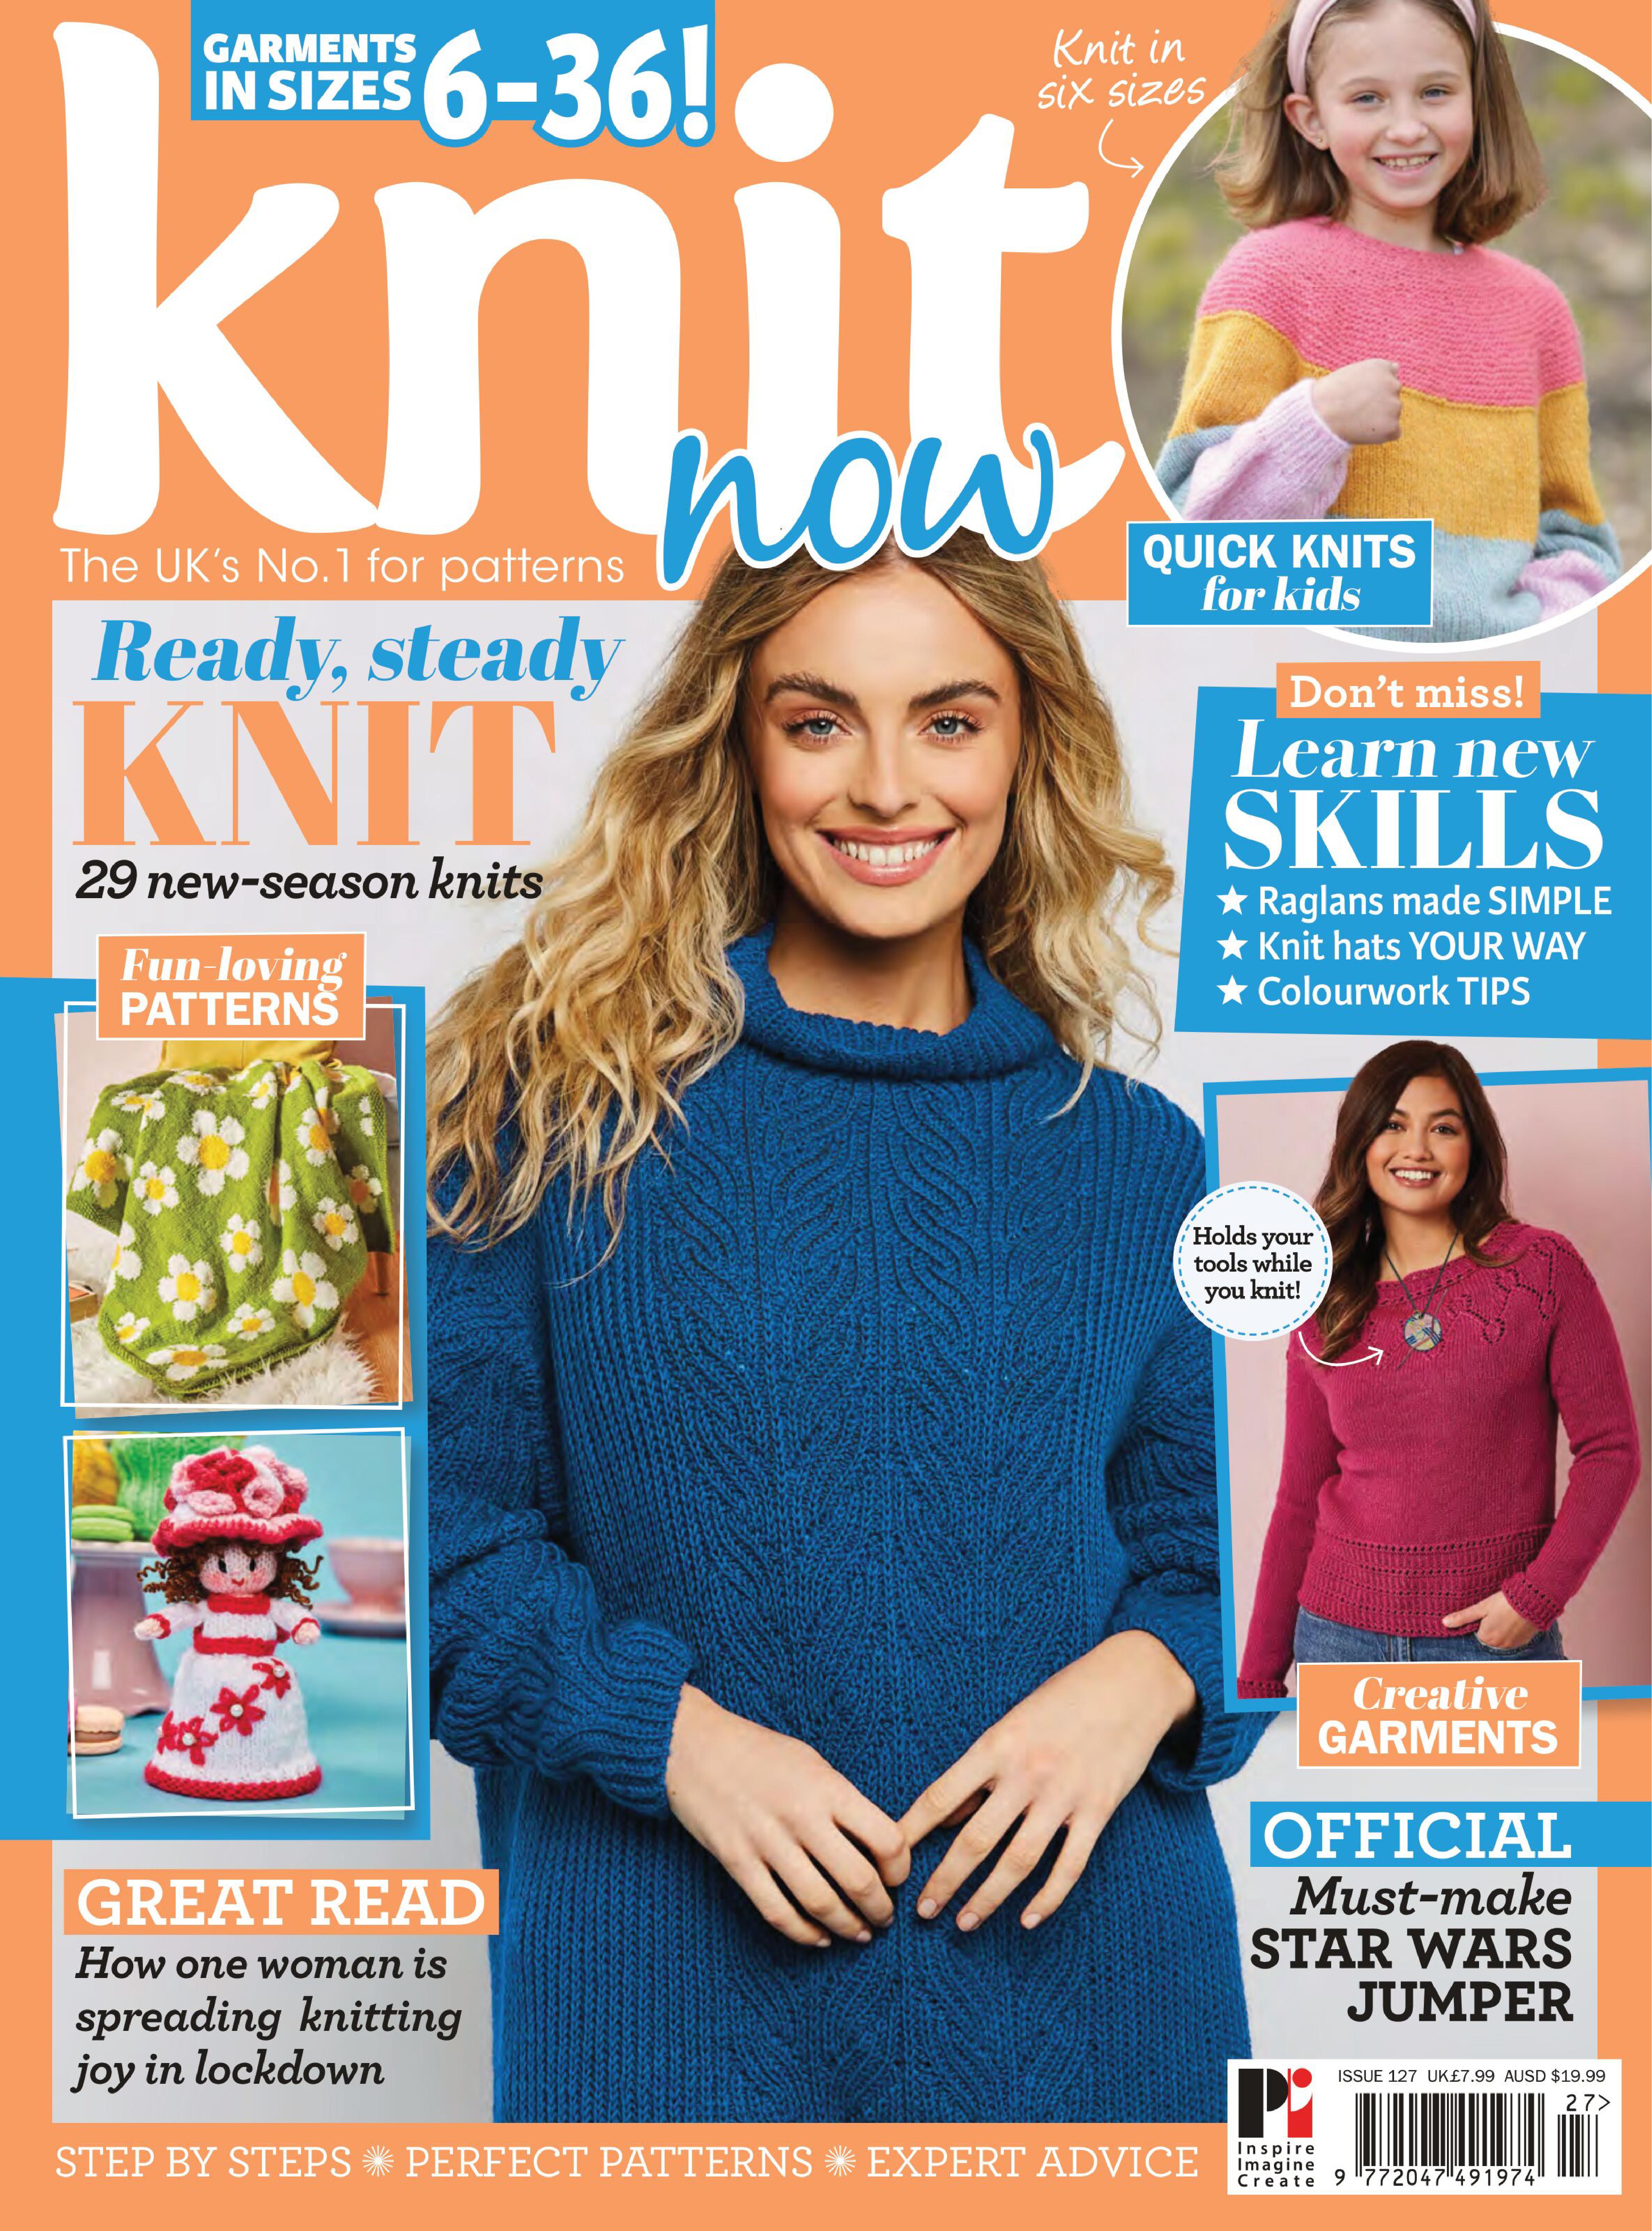 Now magazine. Issue 127. Knit Now, Issue 1, October 2011. Knit Now Issue 54 November 2015. Knit Now, Issue 67, December 2016.